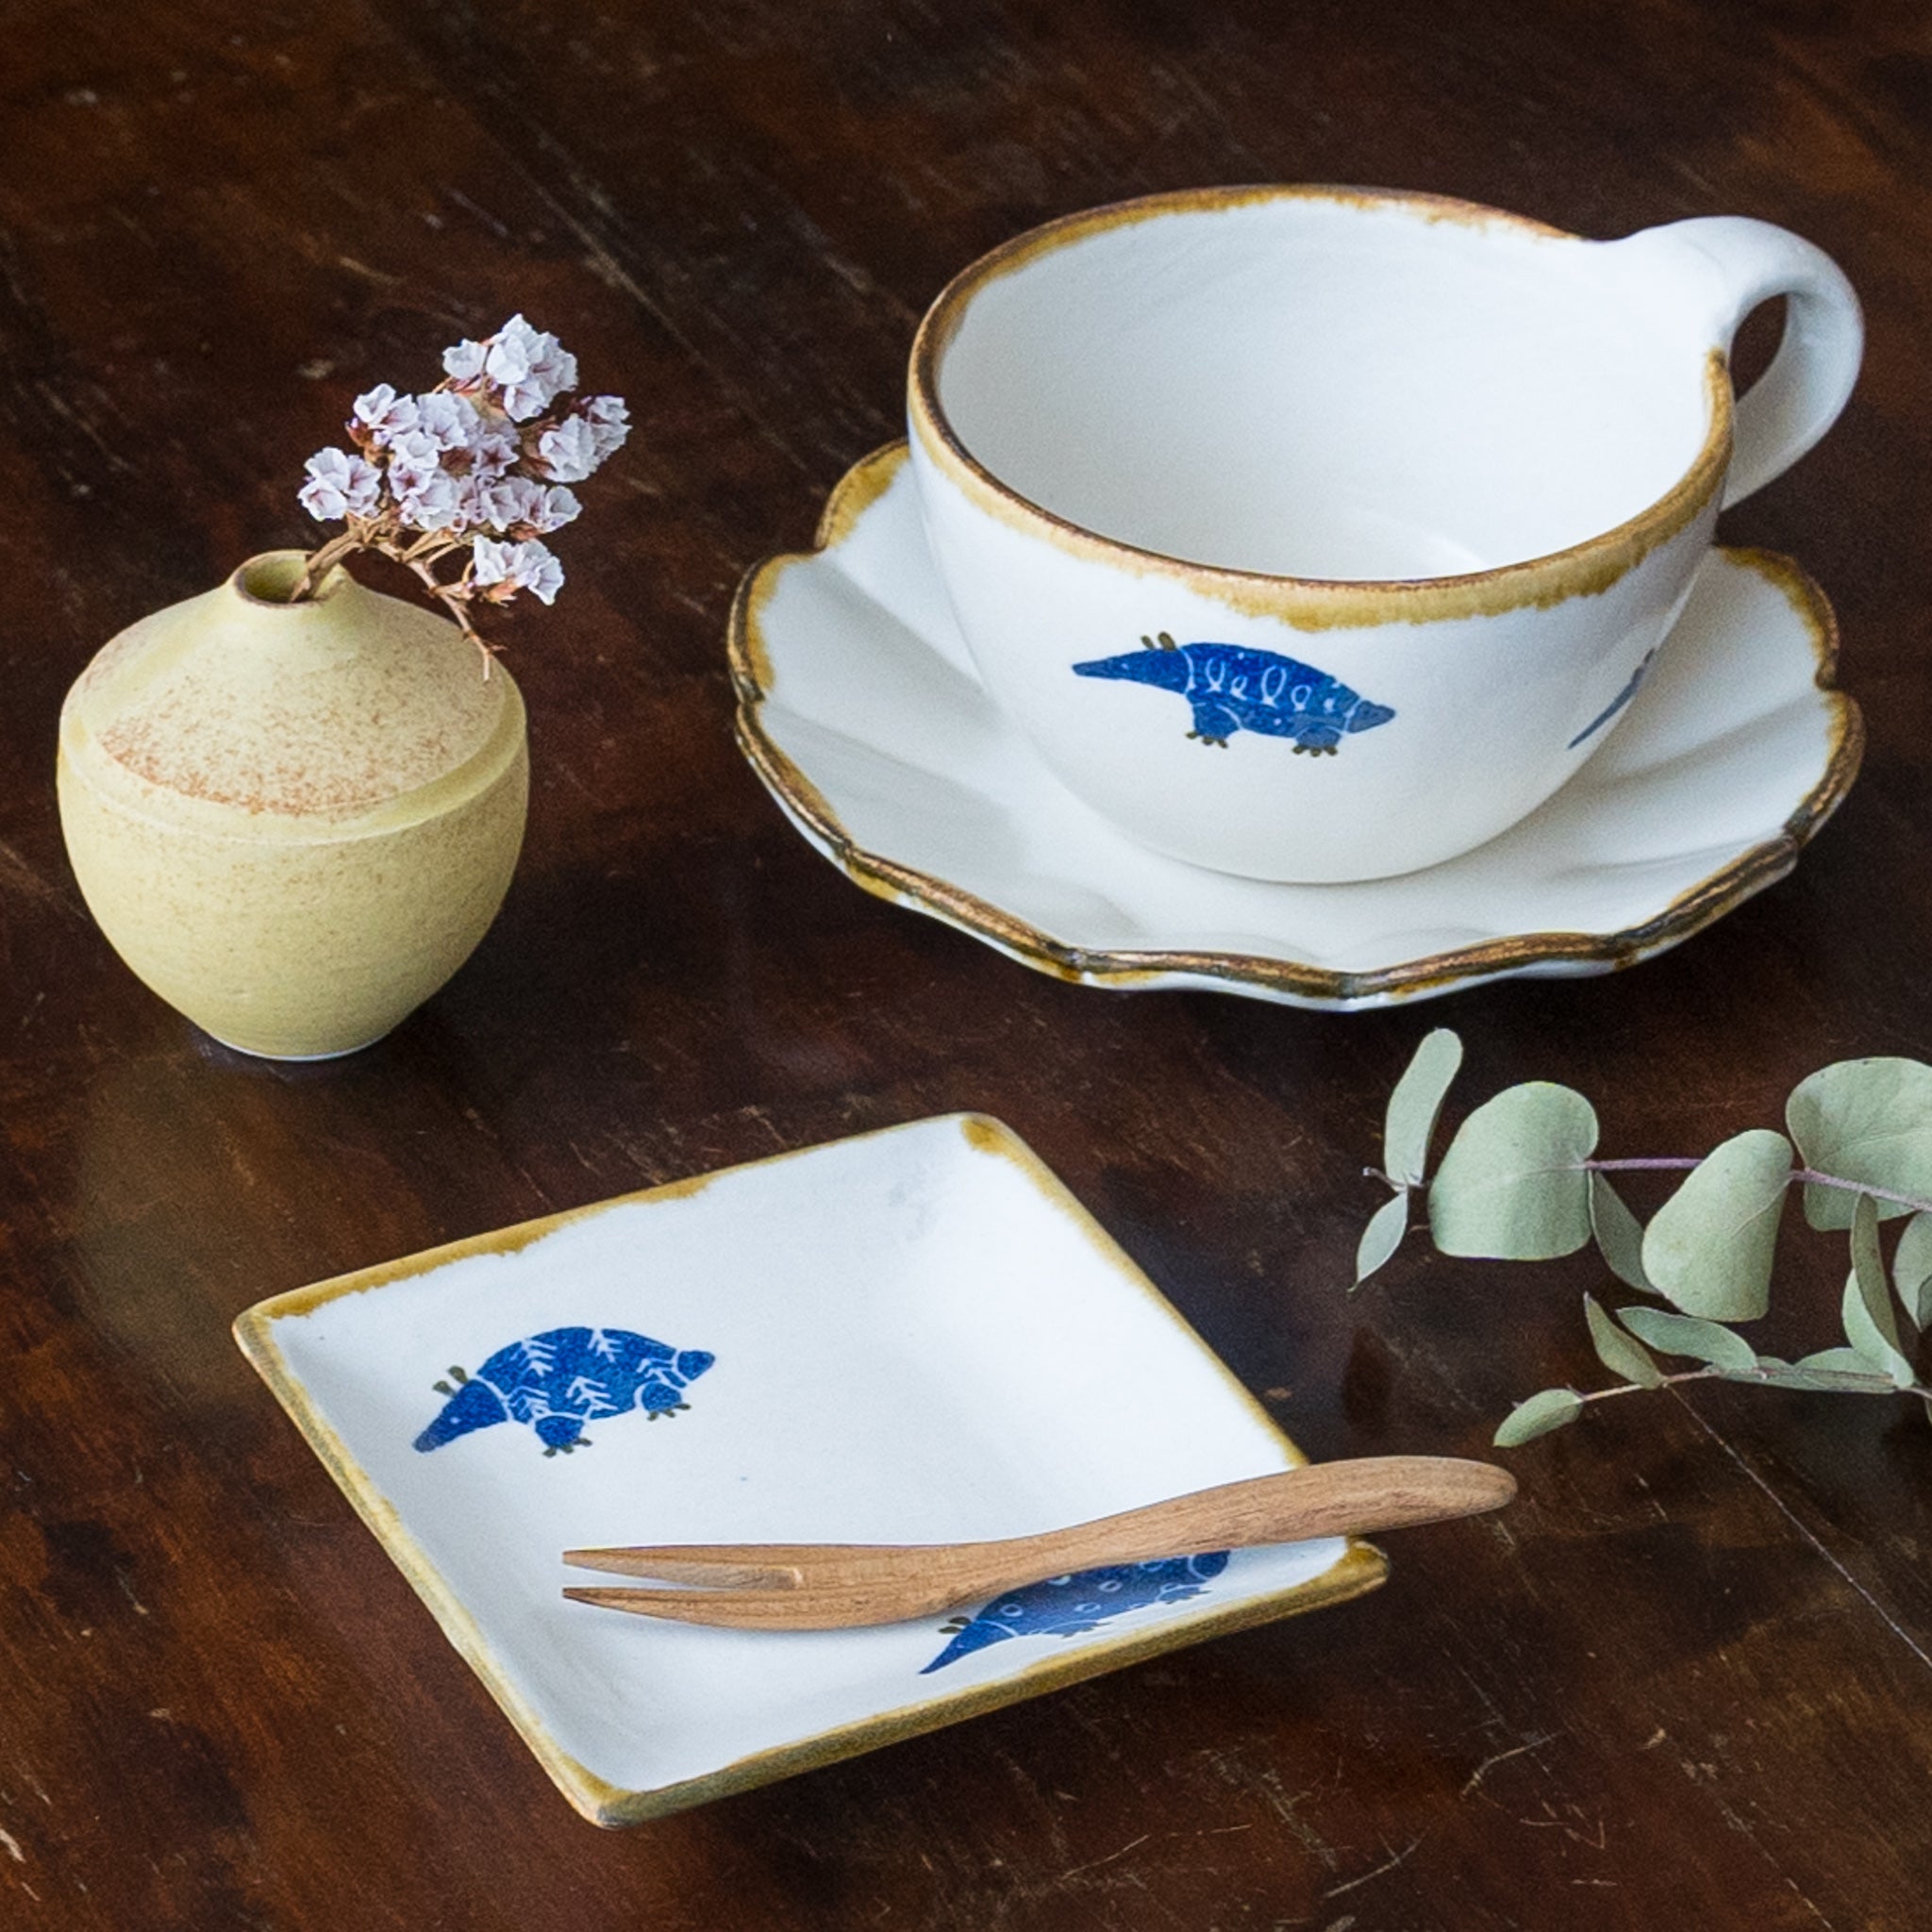 Yasumi Koubou’s Japanese paper dyed animal series tableware where snack time can be enjoyed